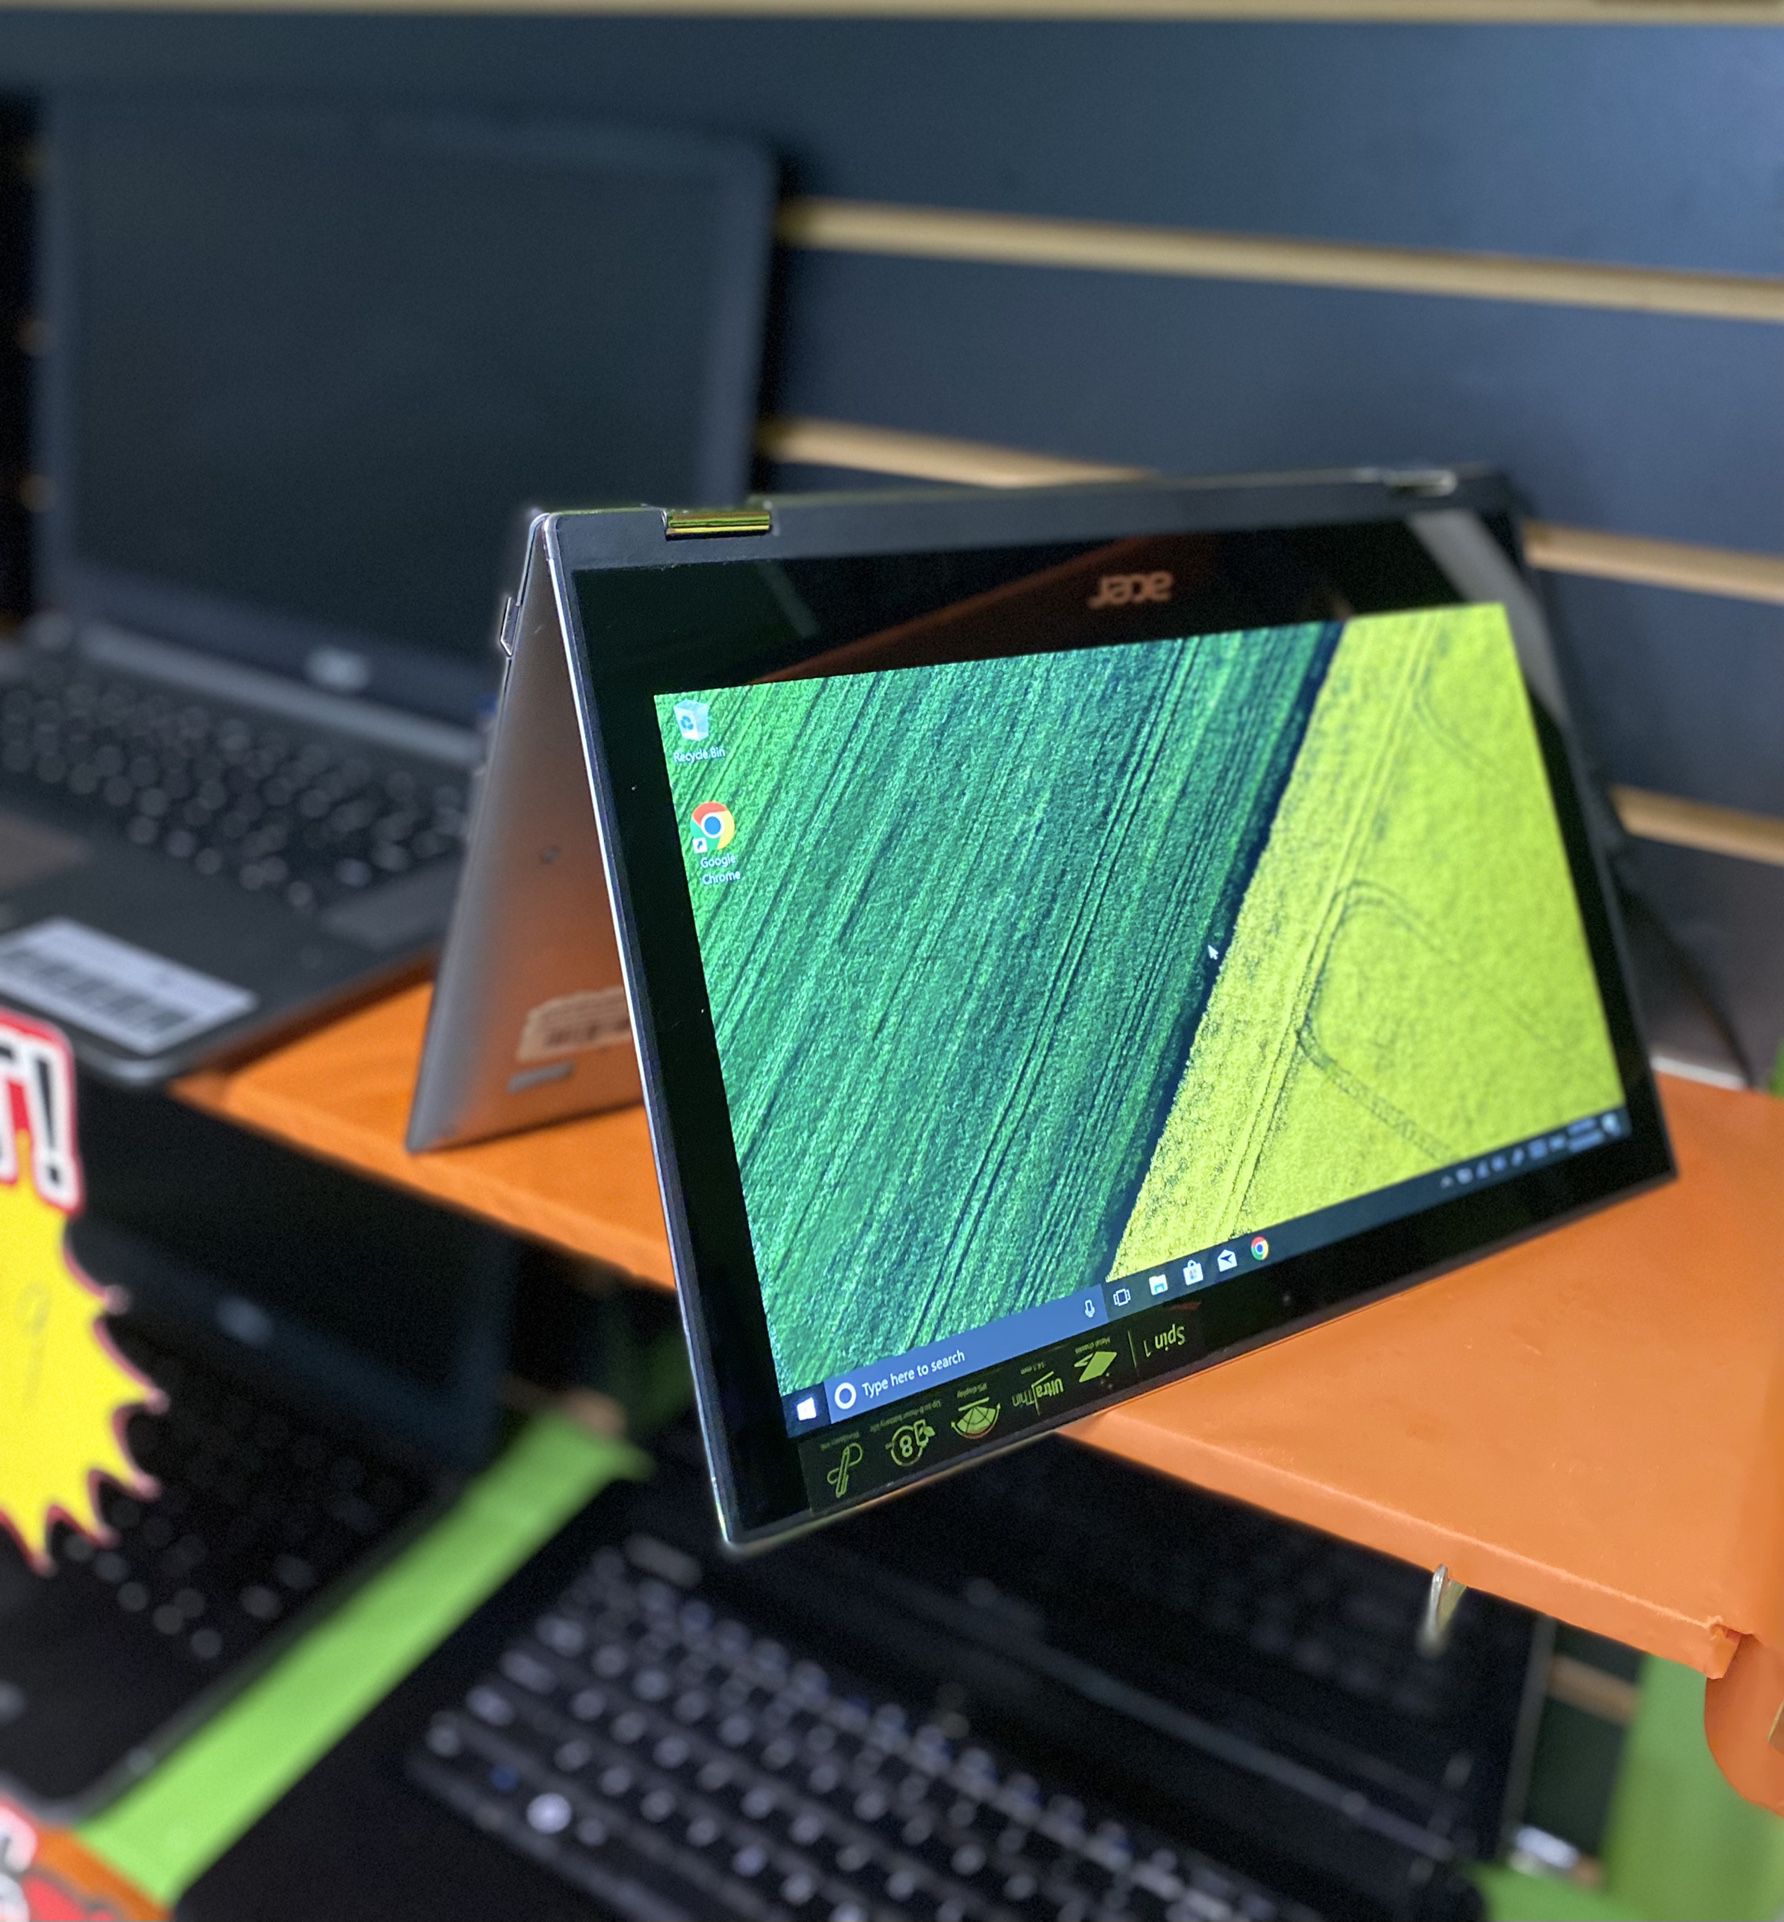 💥TOUCHSCREEN LAPTOP ON SALE TODAY 💥